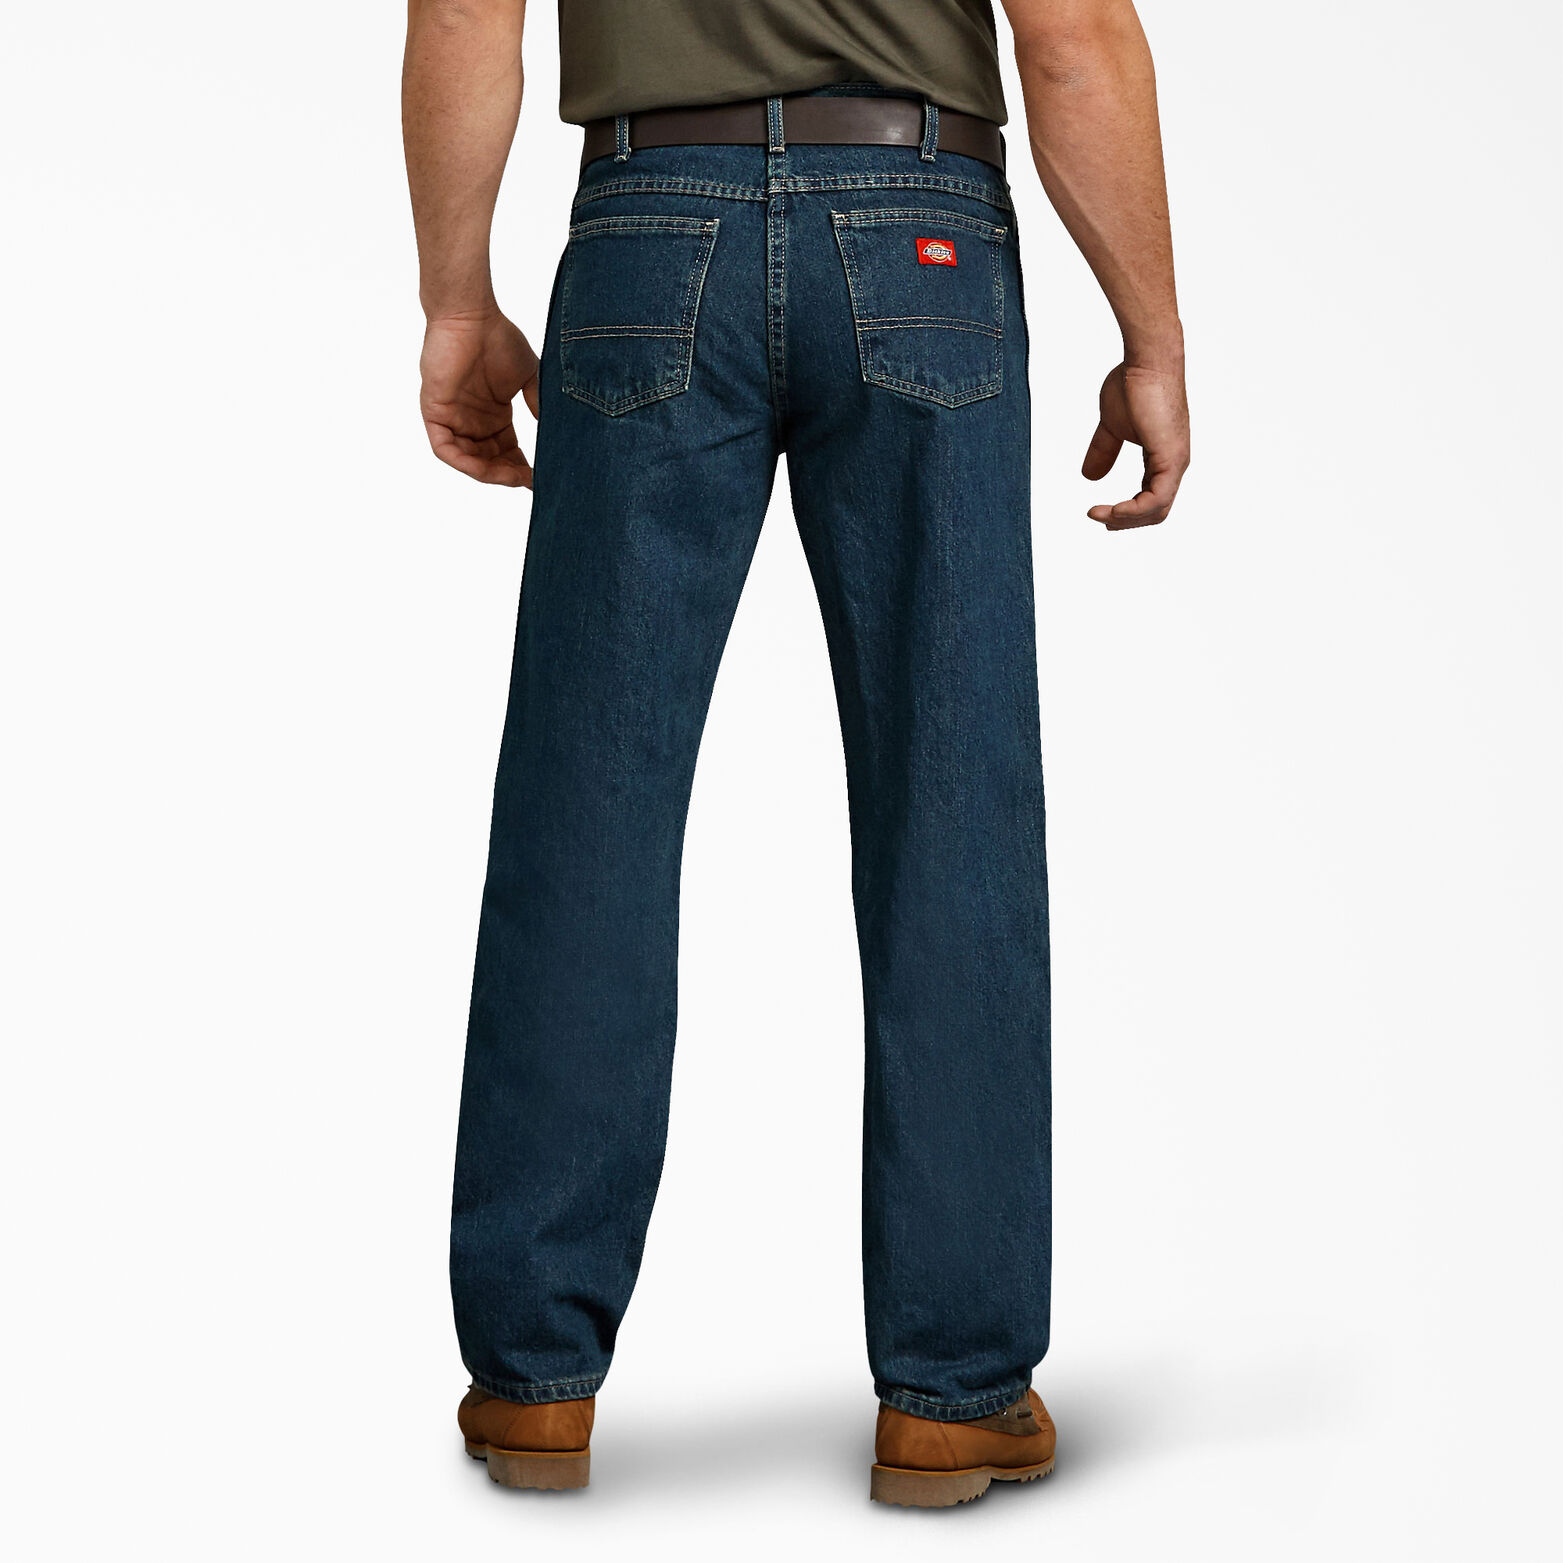 Relaxed Fit Jeans for Men Heritage Tinted Khaki | Dickies.com